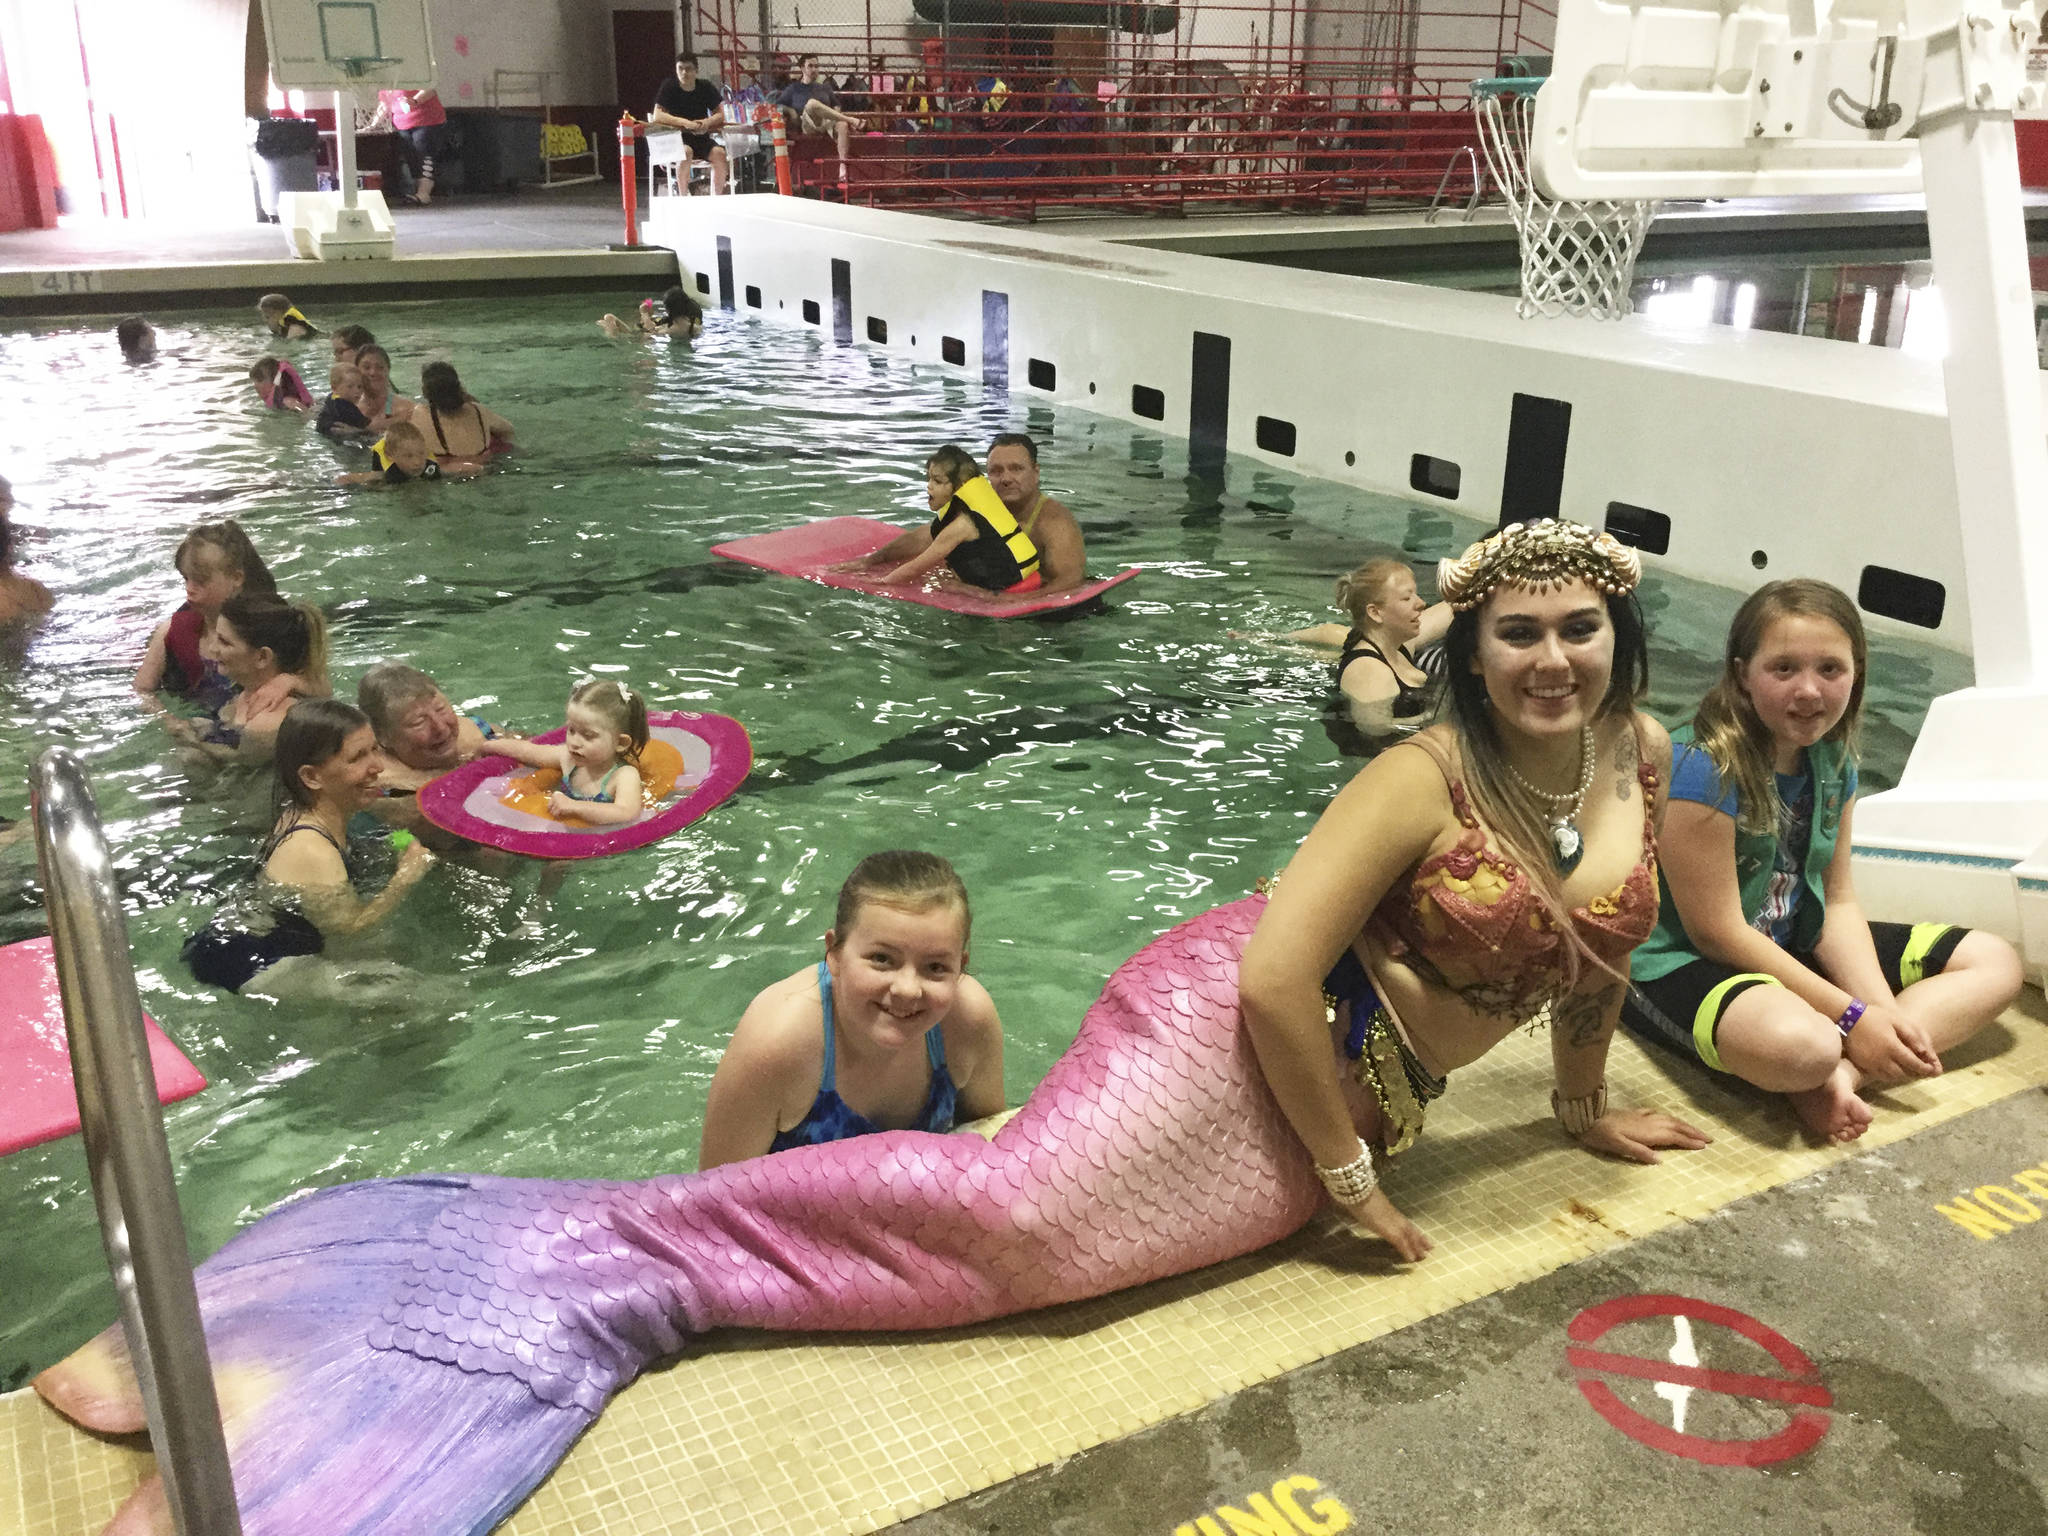 Avery Cagle (left) and Danica Jensen, pictured here with Seattle mermaid Tessie LaMourea. The two girls led their Arlington Junior Girl Scouts troop in hosting a “Swim With A Mermaid” party for special needs girls and their families Saturday at the Marysville-Pilchuck High School pool.